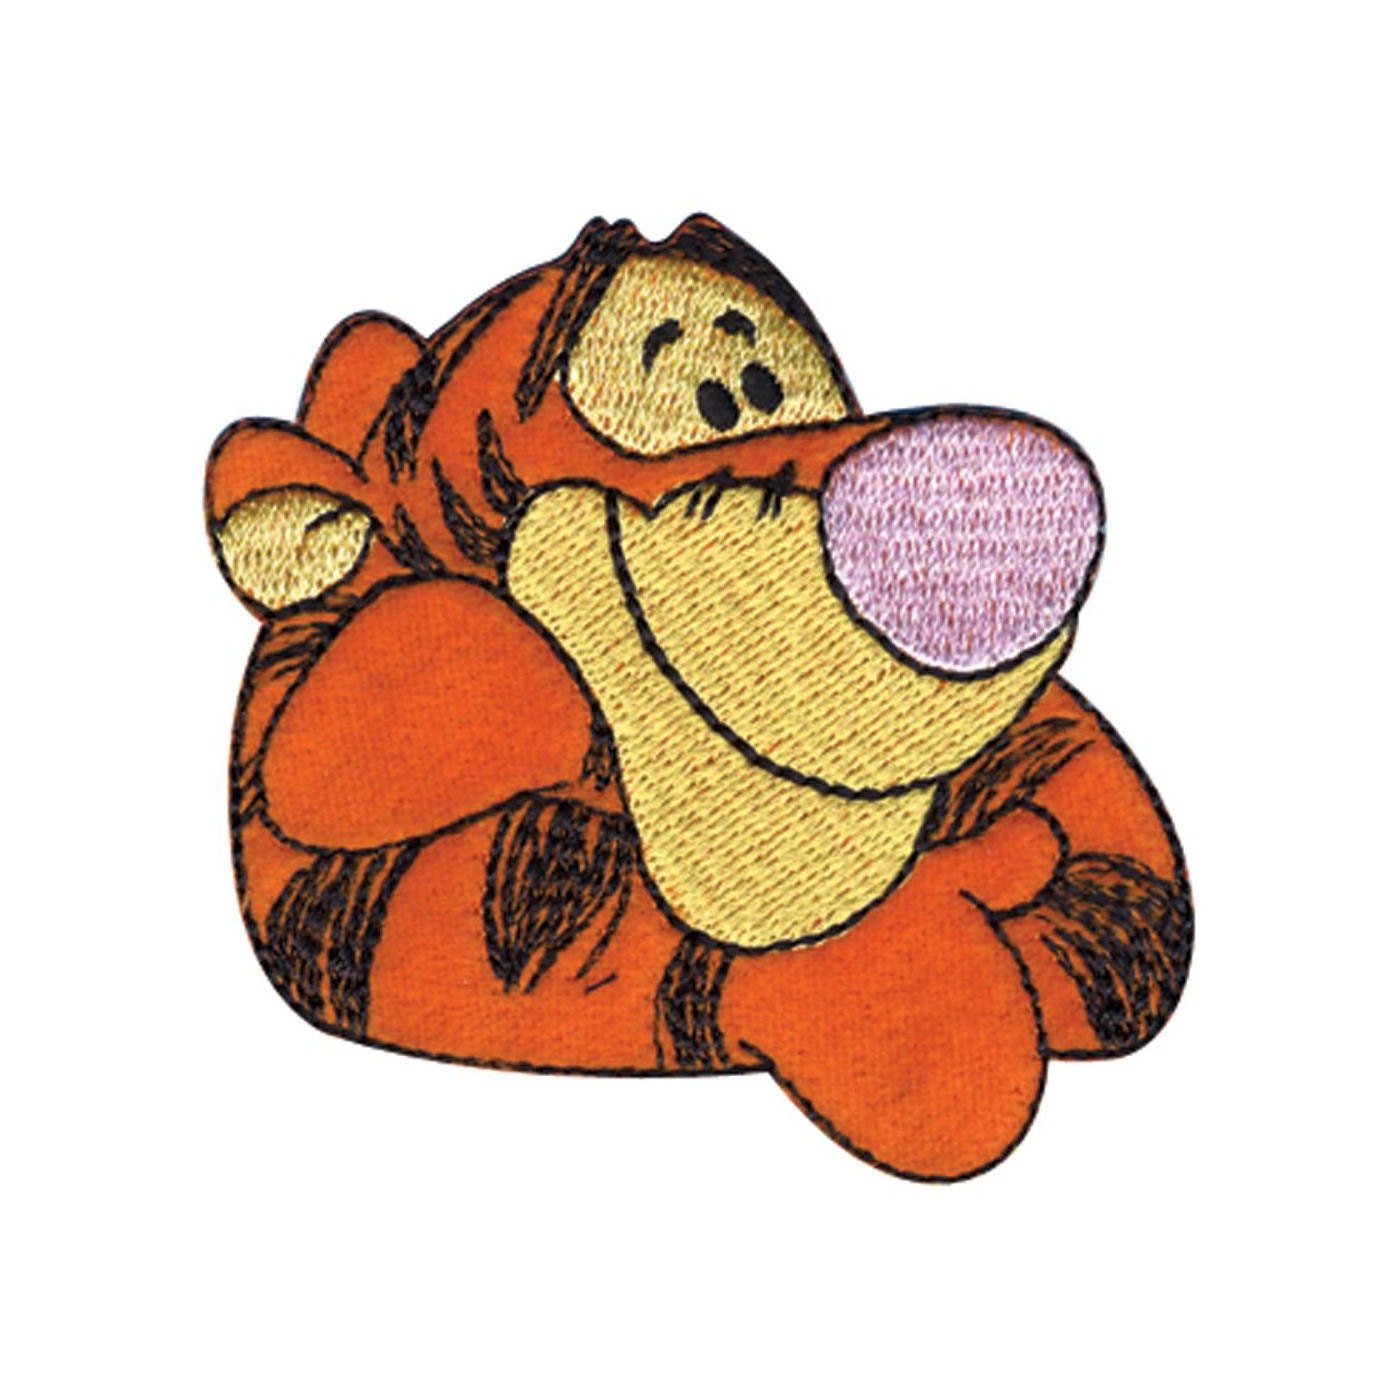 DISNEY Tigger Iron On Applique Iron On Patch by